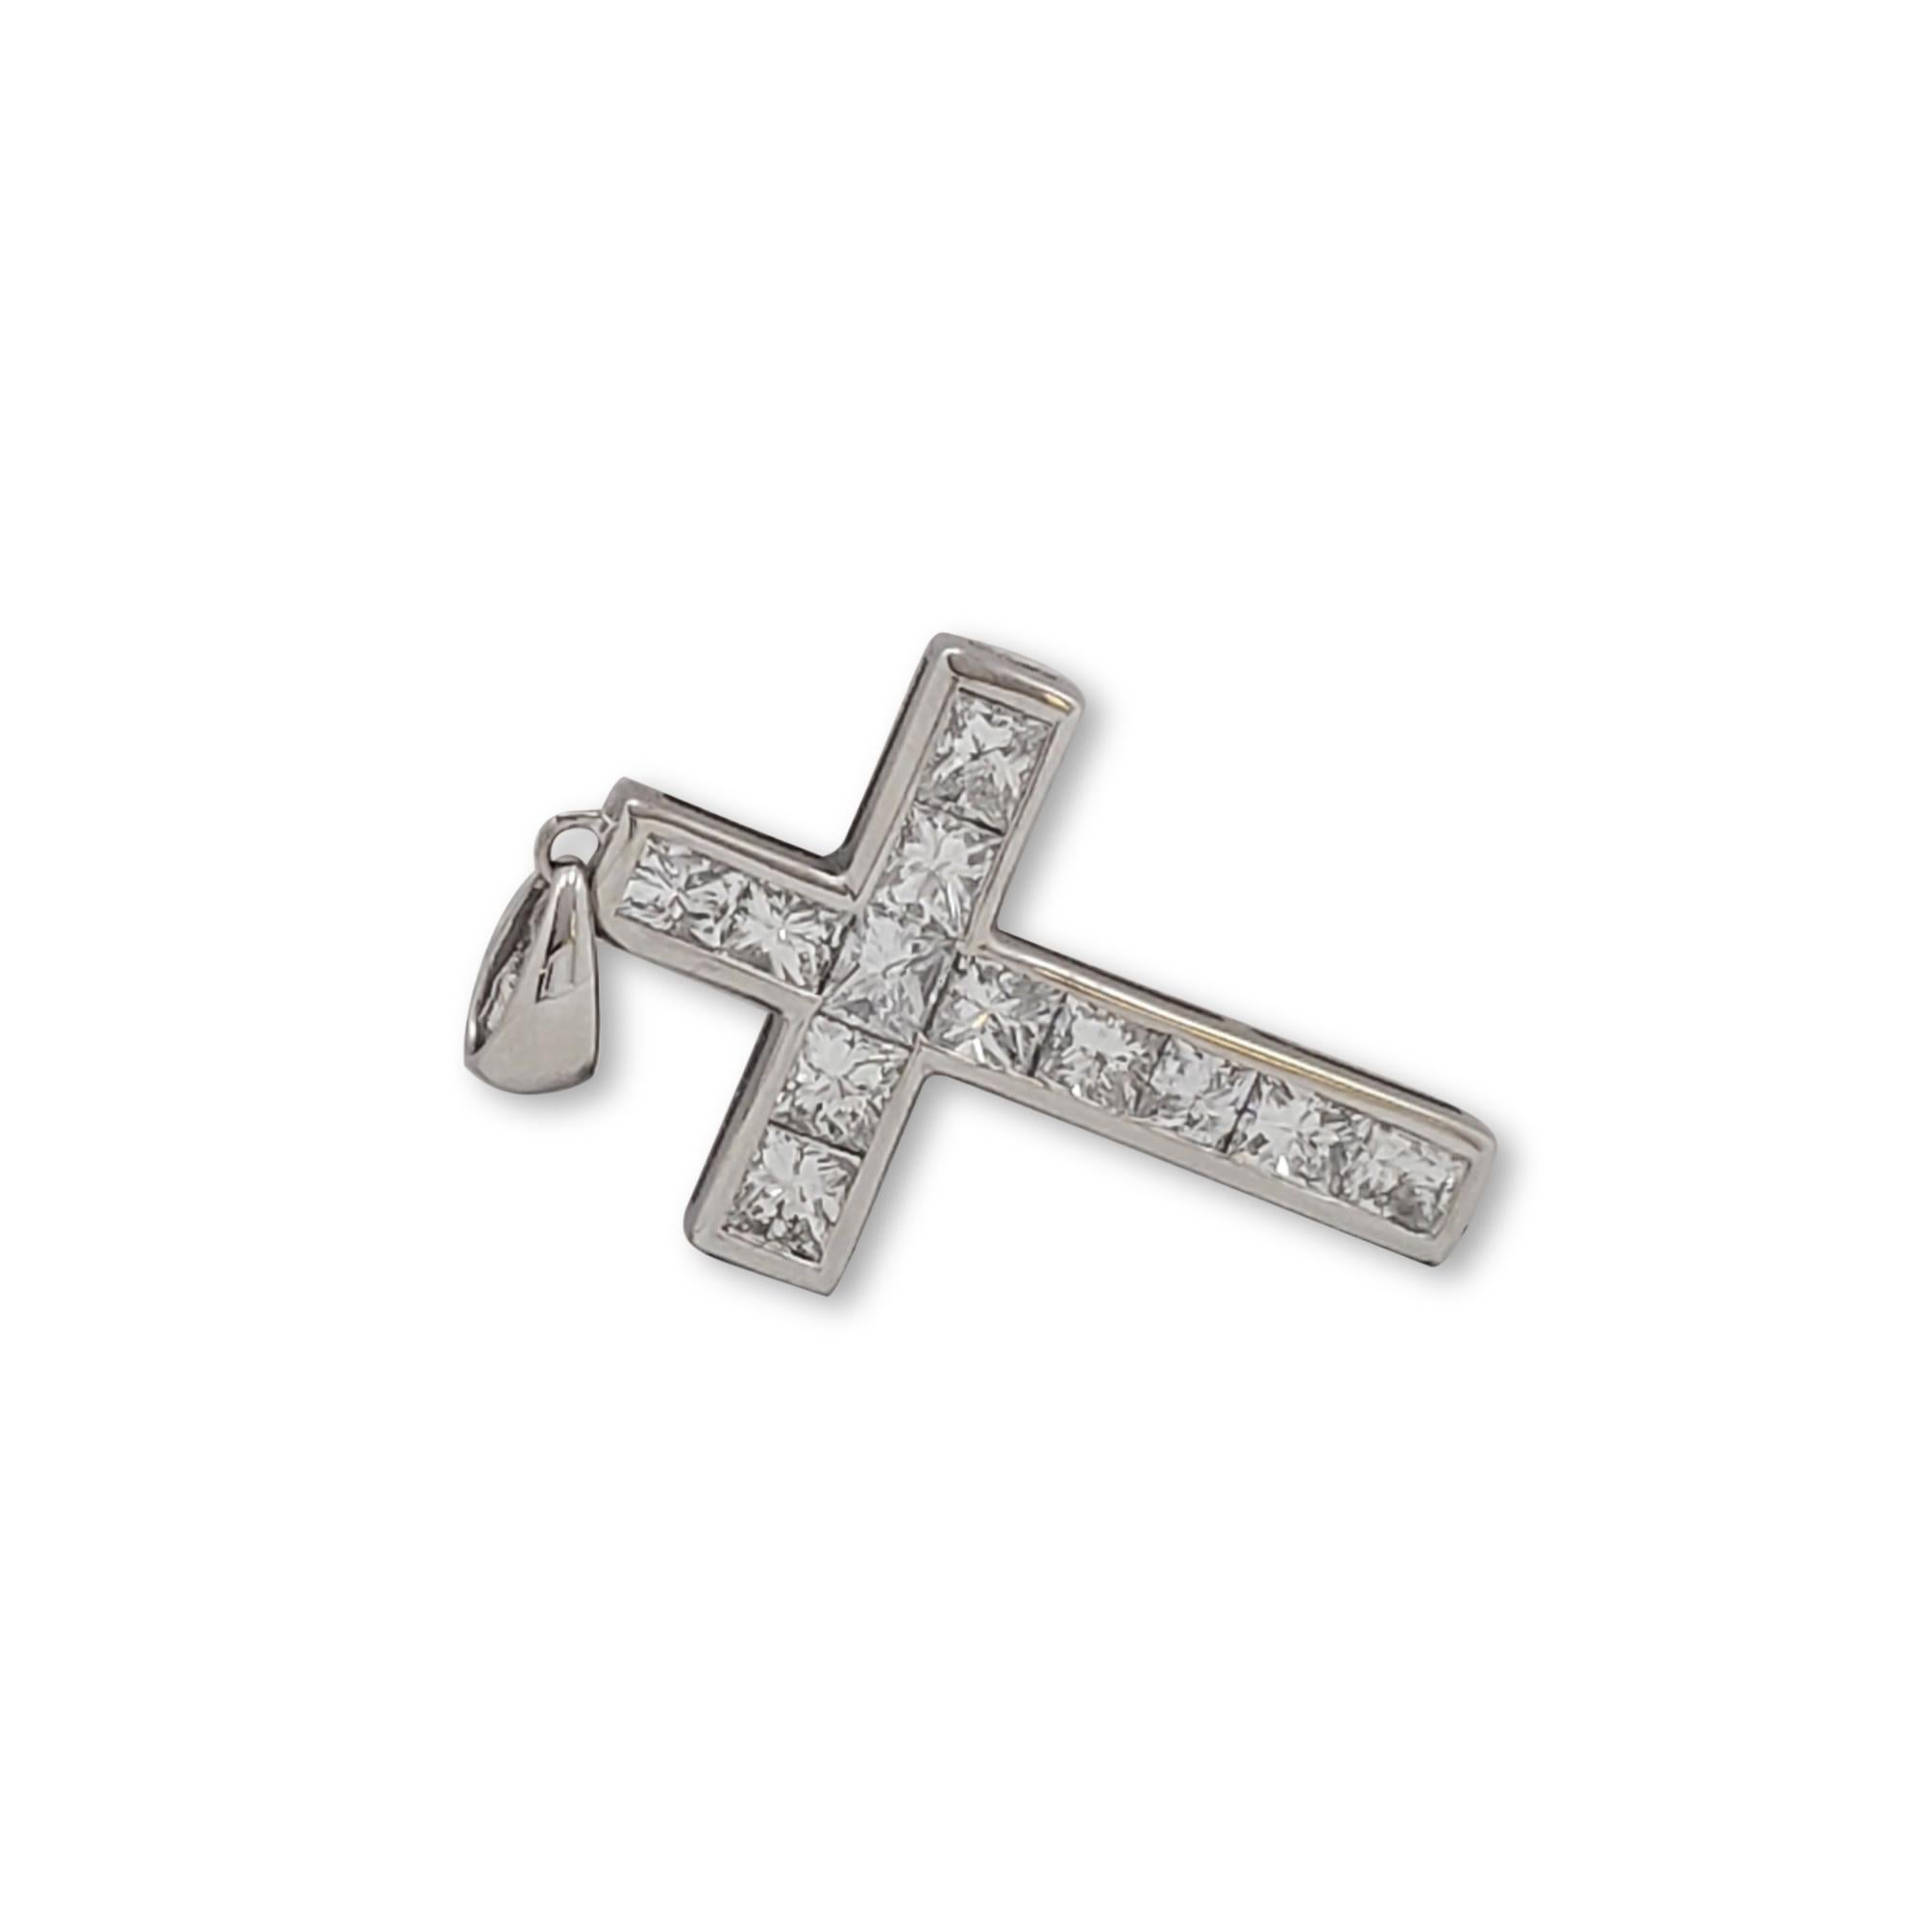 A charming cross pendant crafted in 18 karat white gold and set with an estimated 1.35 carats (G-I color, SI clarity) of princess cut diamonds.  The pendant measures .95 inches in length and .66 inches wide. CIRCA 2000s

Metal: 18k White